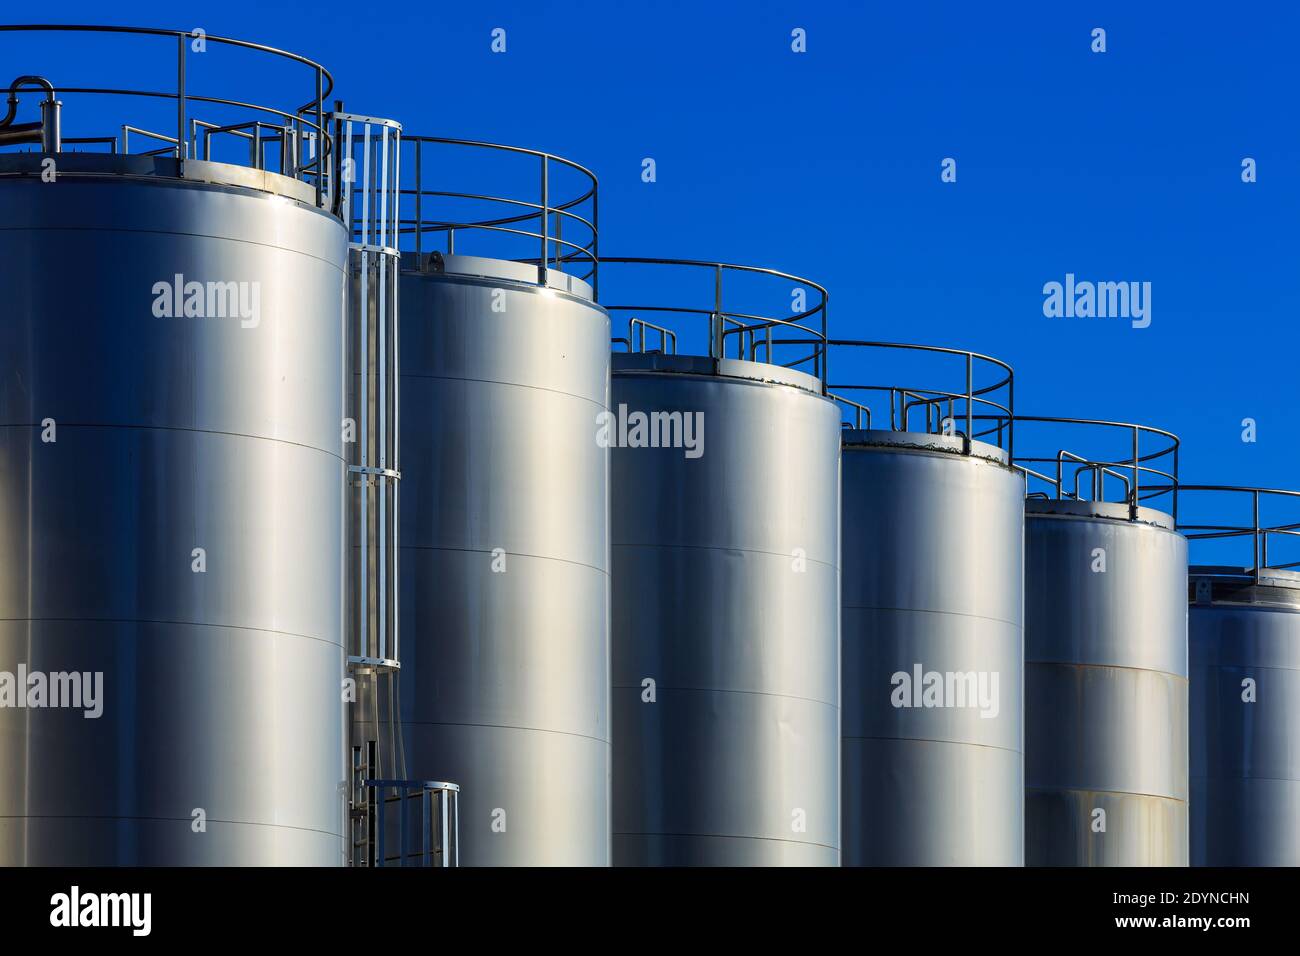 A row of giant metal storage tanks gleaming in the sunlight. Photographed at a dairy factory Stock Photo